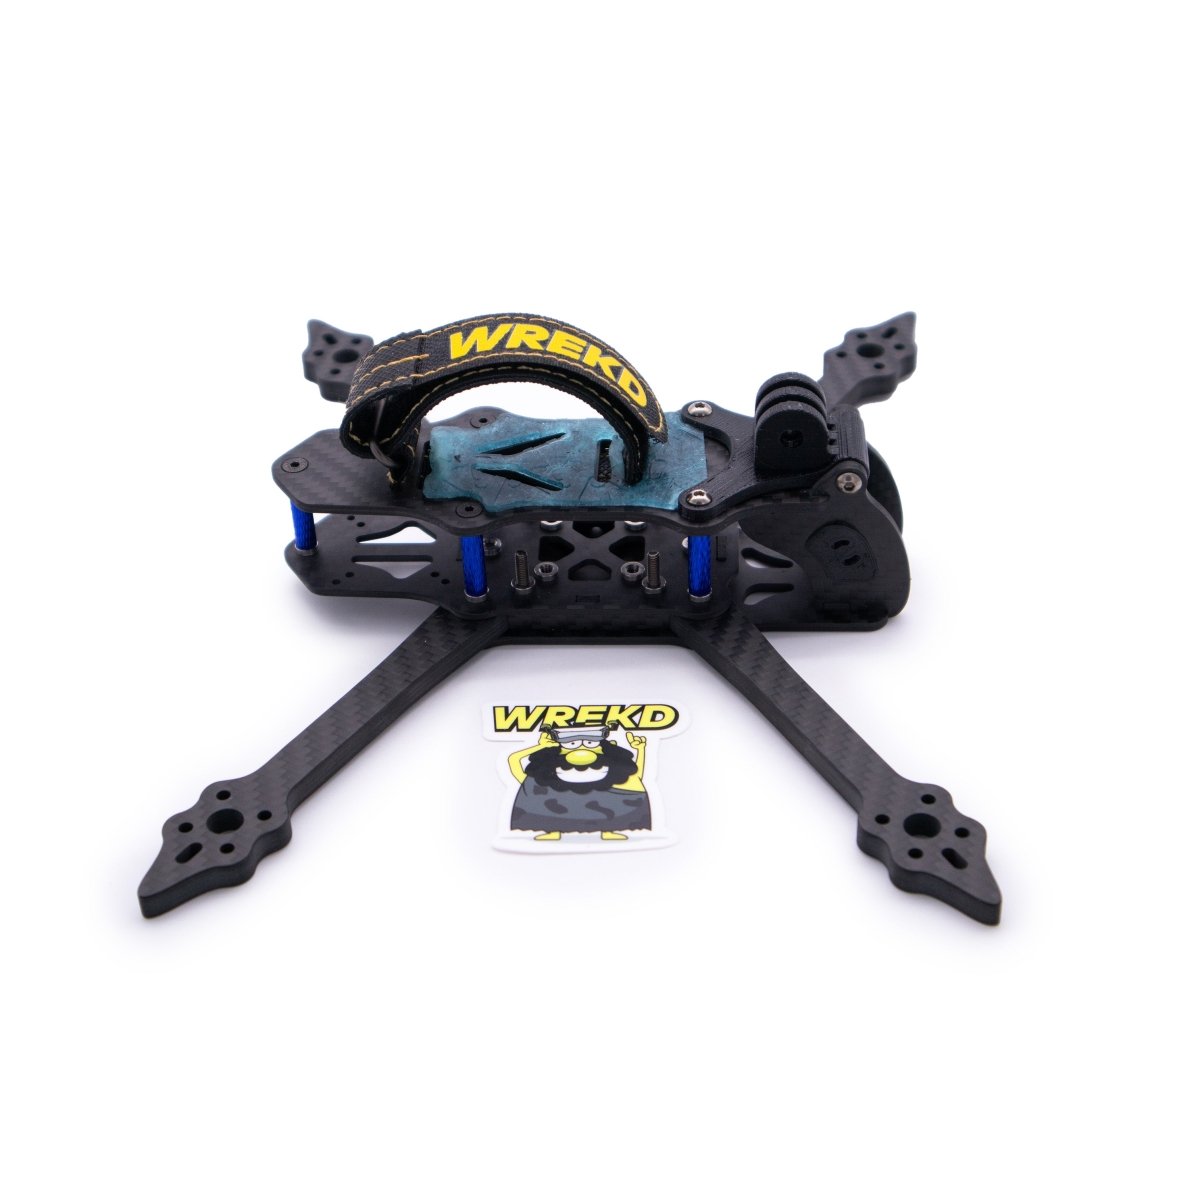 Vannystyle Pro 5" FPV Drone Frame Kit w/ Improved Arm Design!